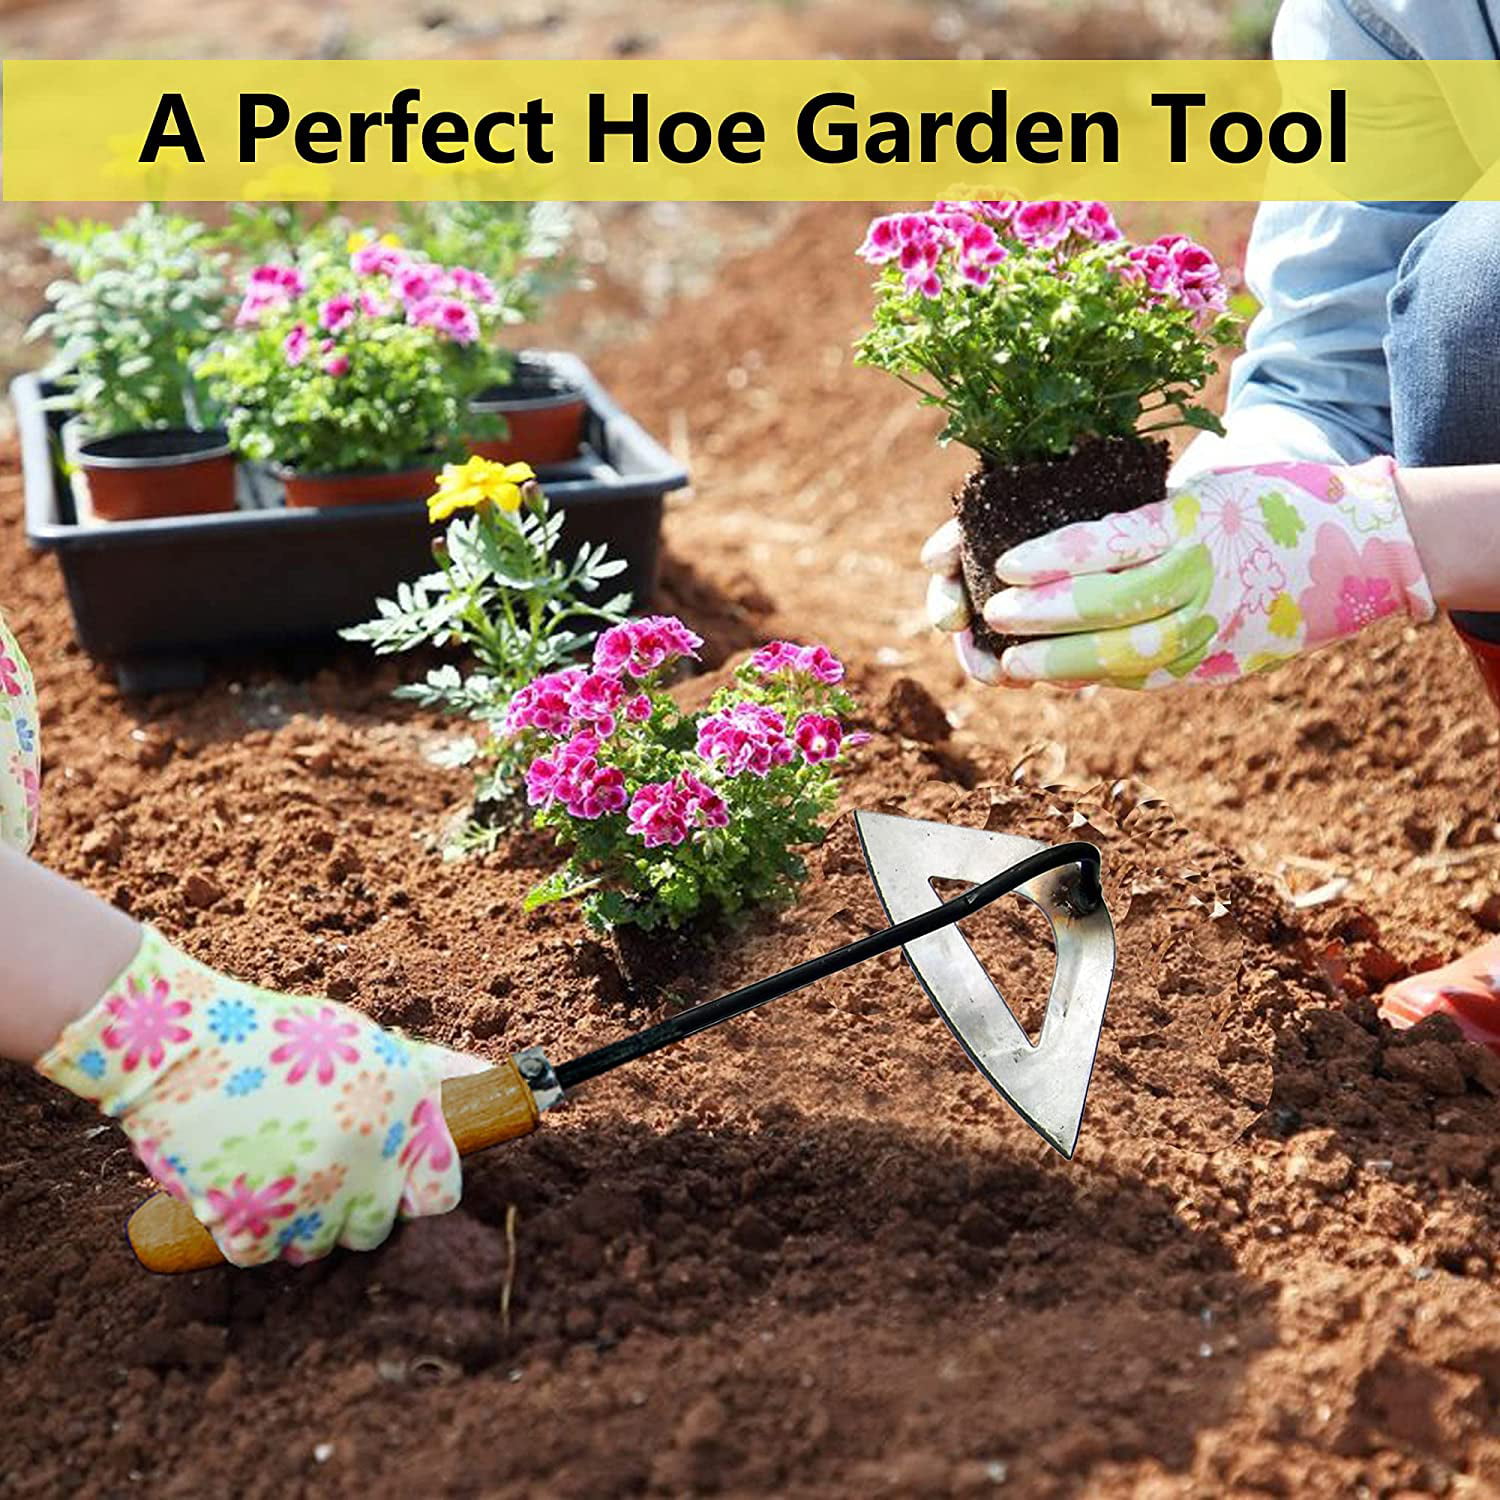 ZHHO Hand-held All-Steel Hardened Hollow Hoe Compatible with Long/&Short Handle for Gardening Weeding,Loosen The Soil Planting Vegetables